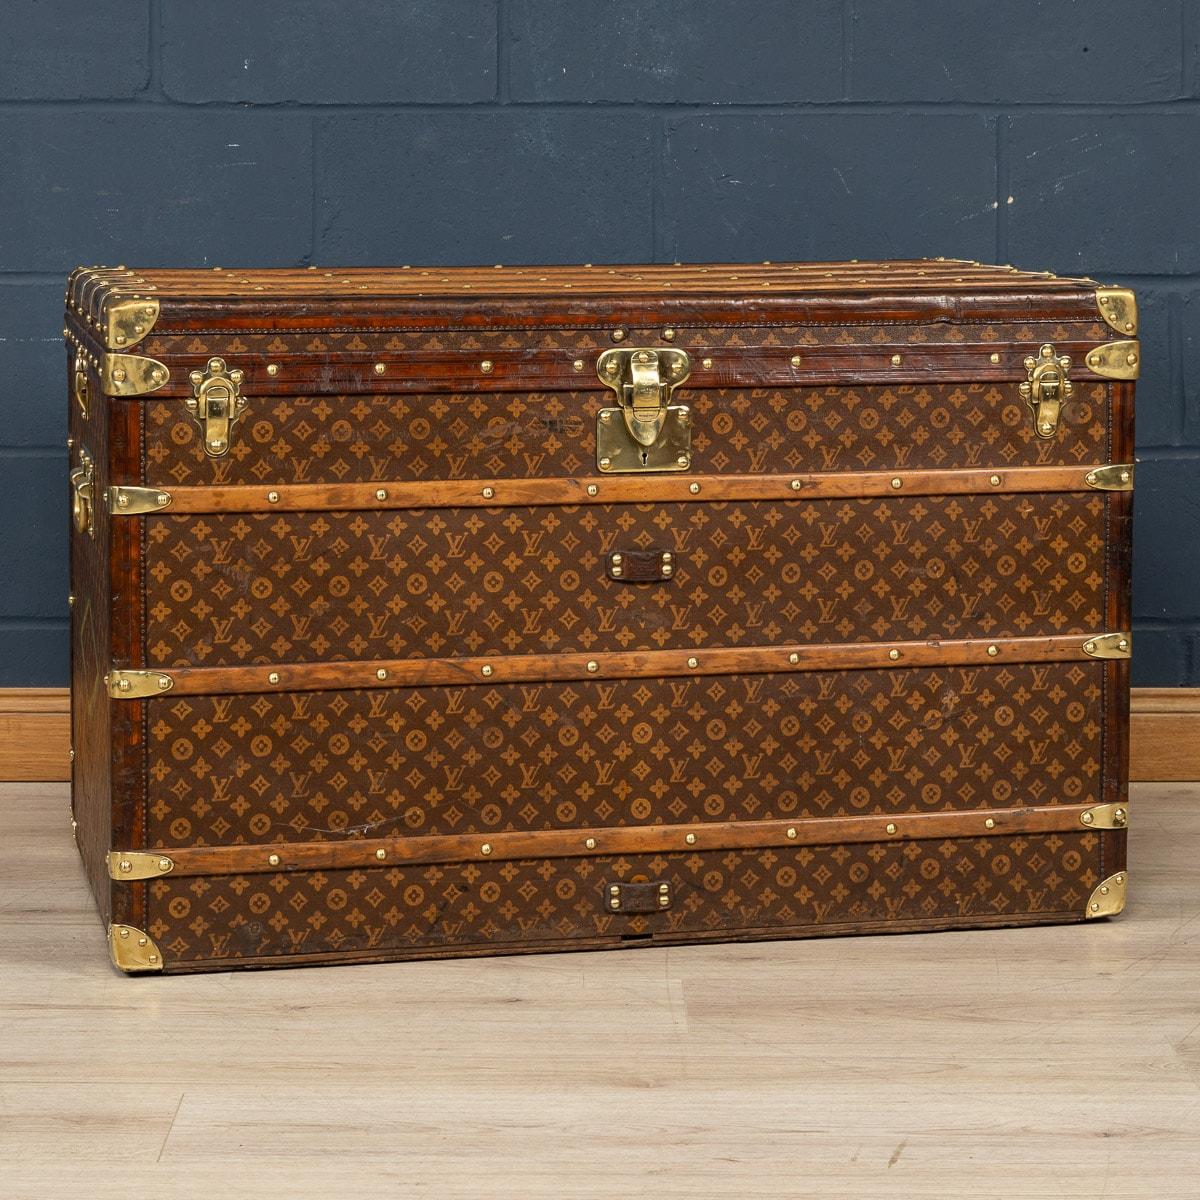 An exquisite “malle haute“ (tall trunk) by Louis Vuitton, early 20th century. The malle haute is the largest of the standard sizes, any trunk larger than this one would have been custom made. Covered in the world famous LV monogrammed canvas, with